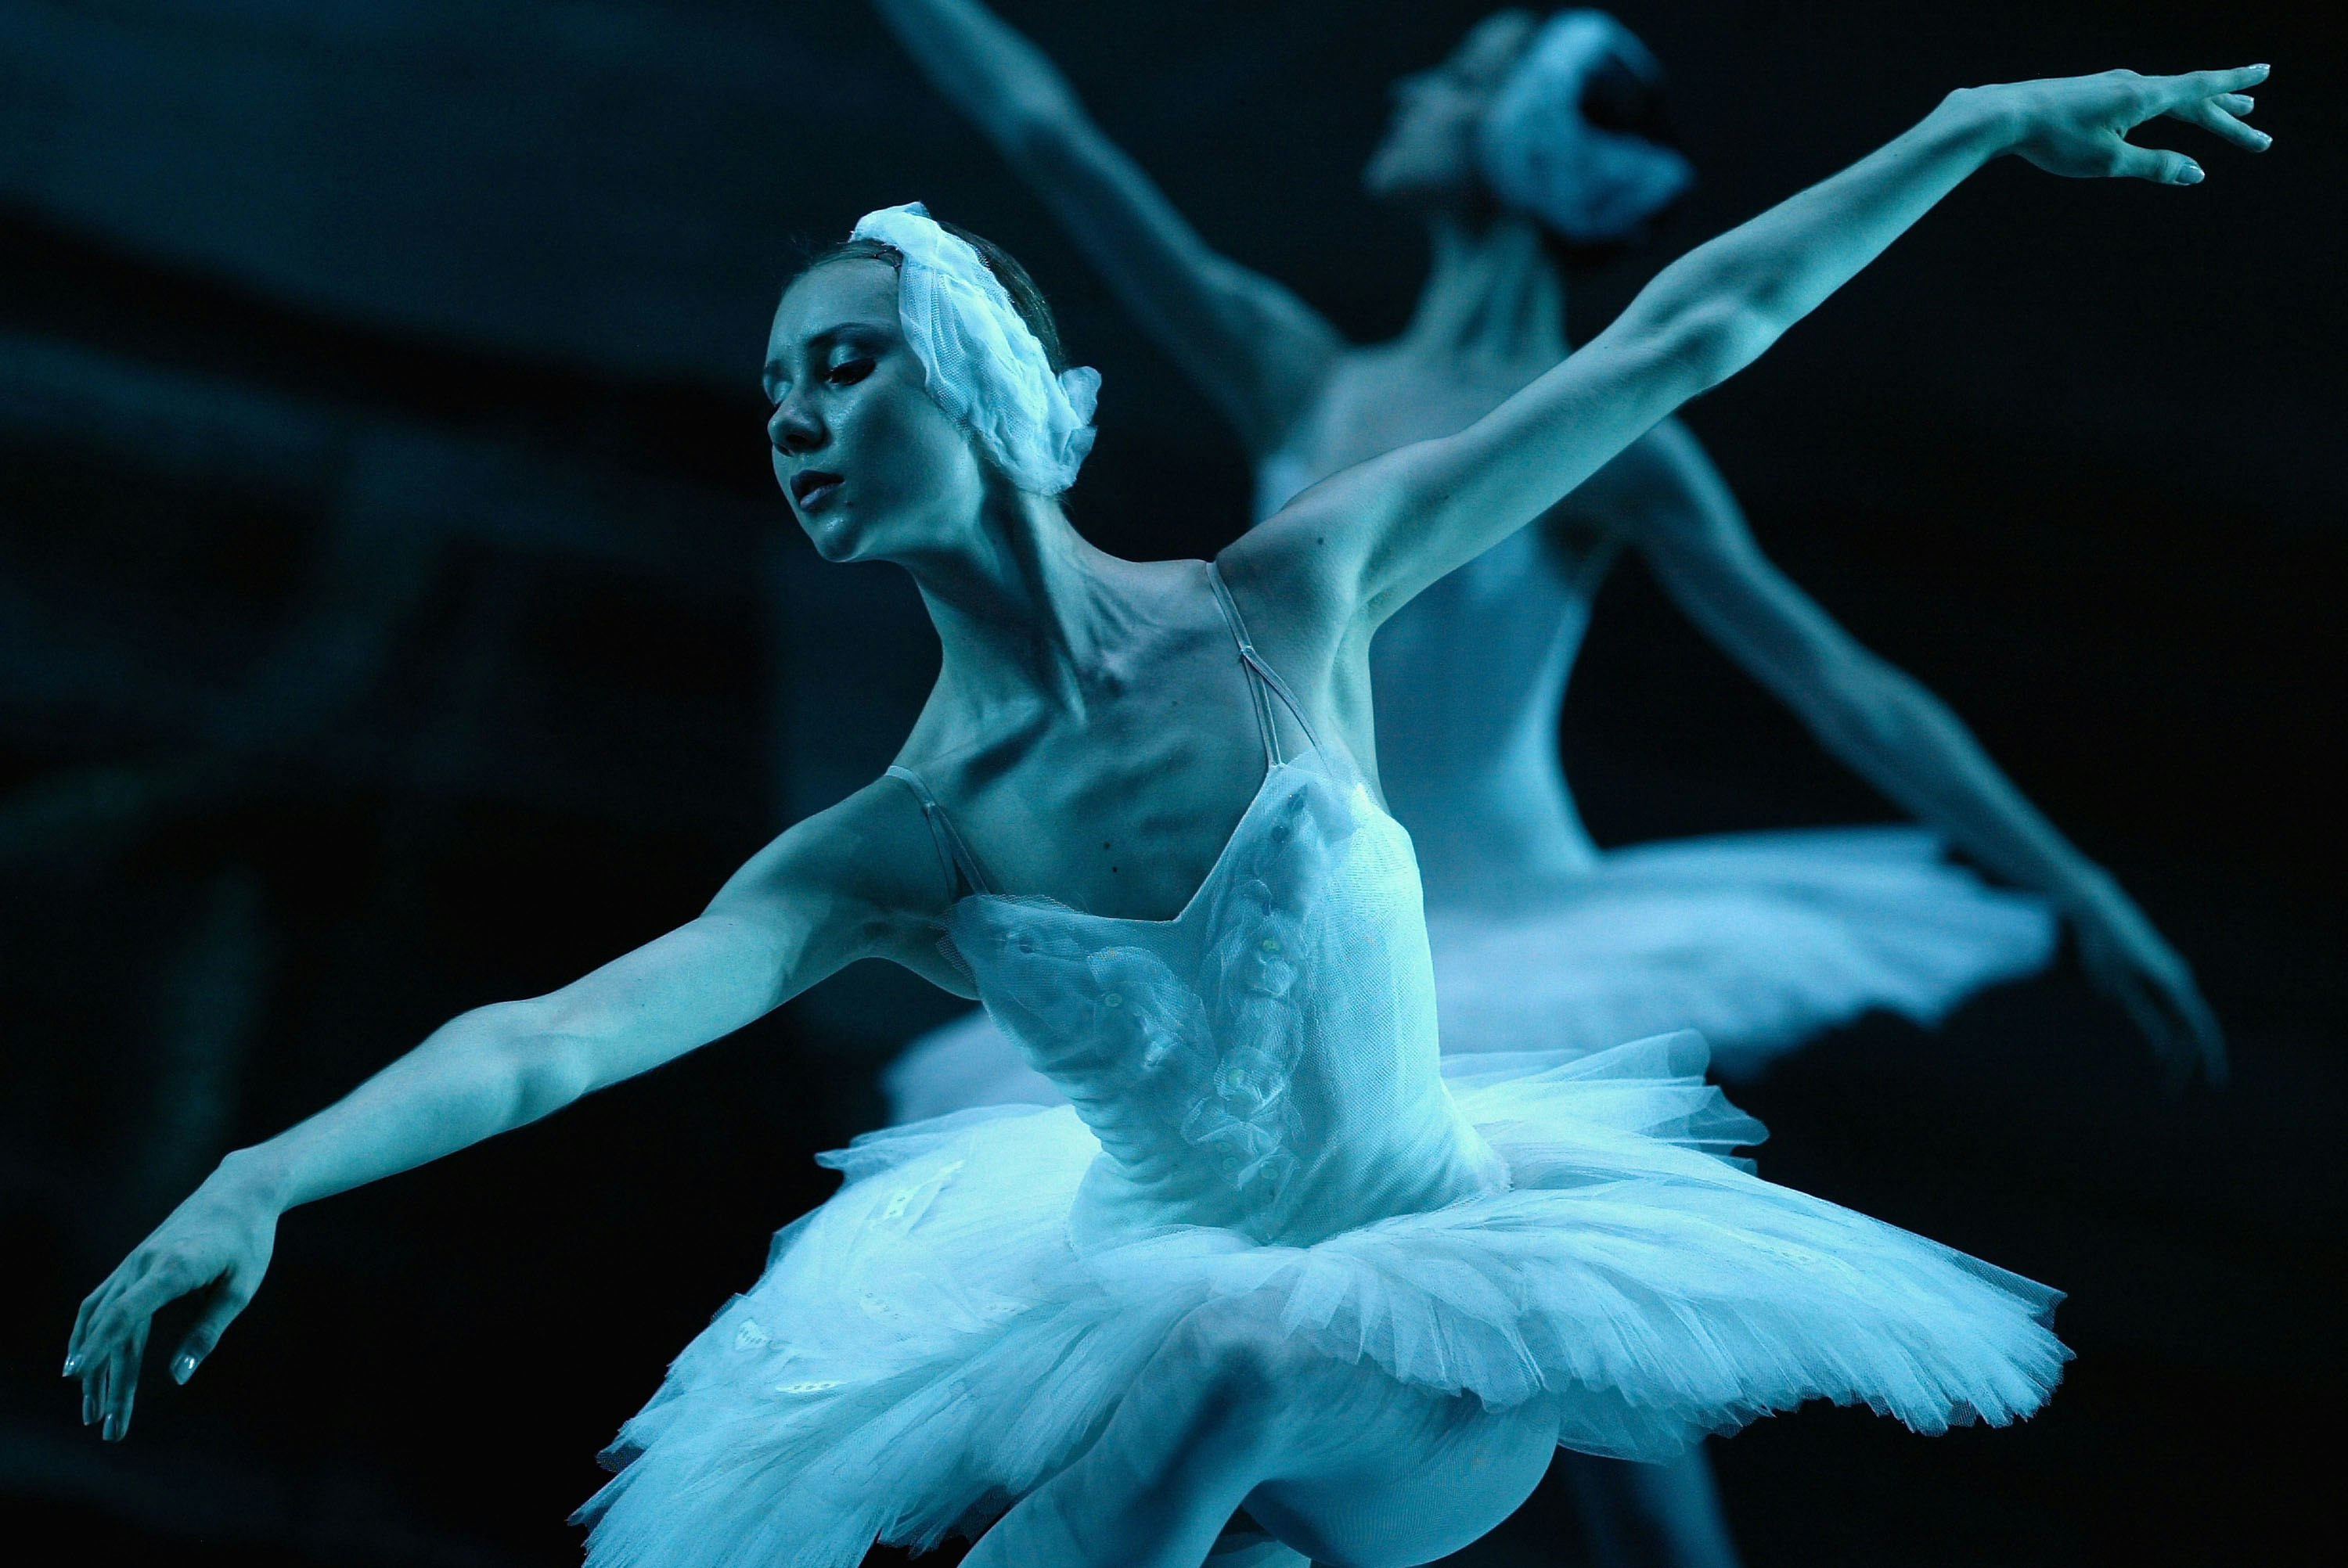 A picture of a ballerina during the Swan Lake